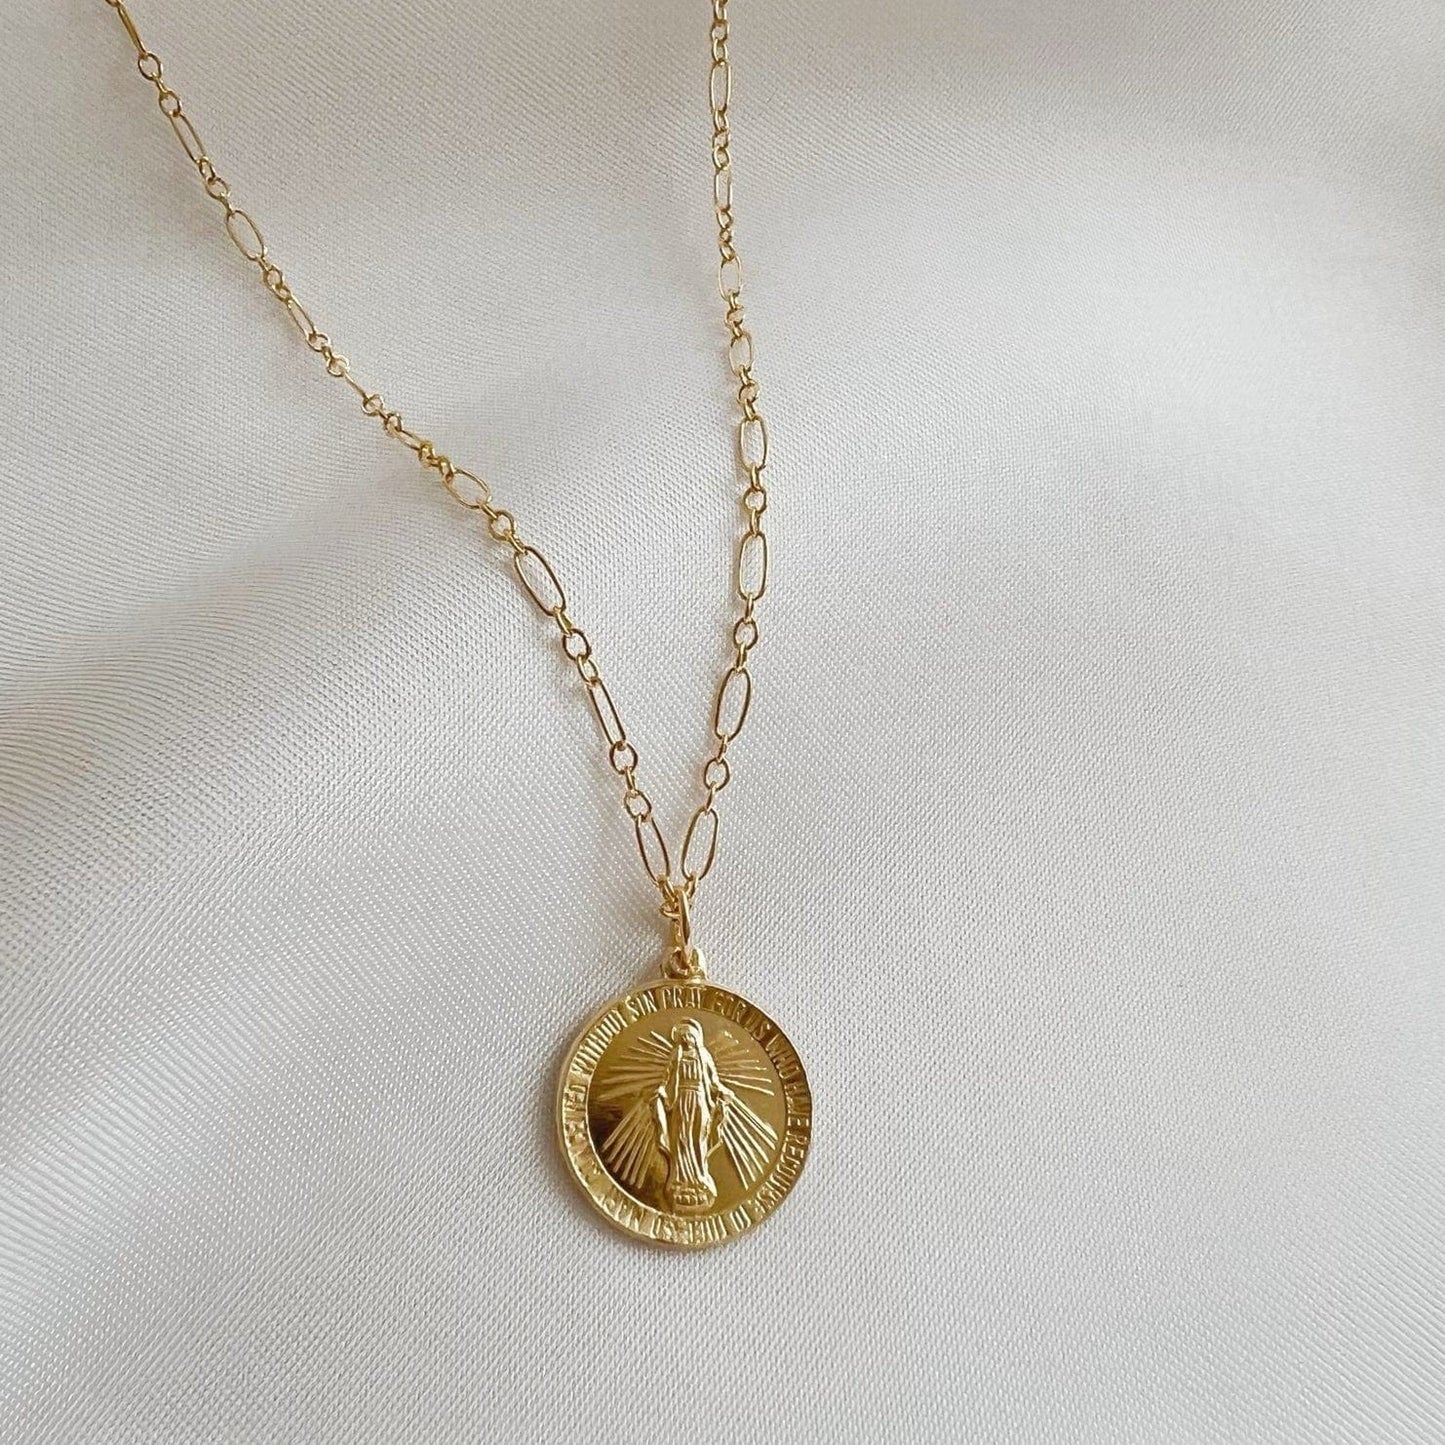 NKL-GF Our Lady Virgin Mary Necklace Gold Filled